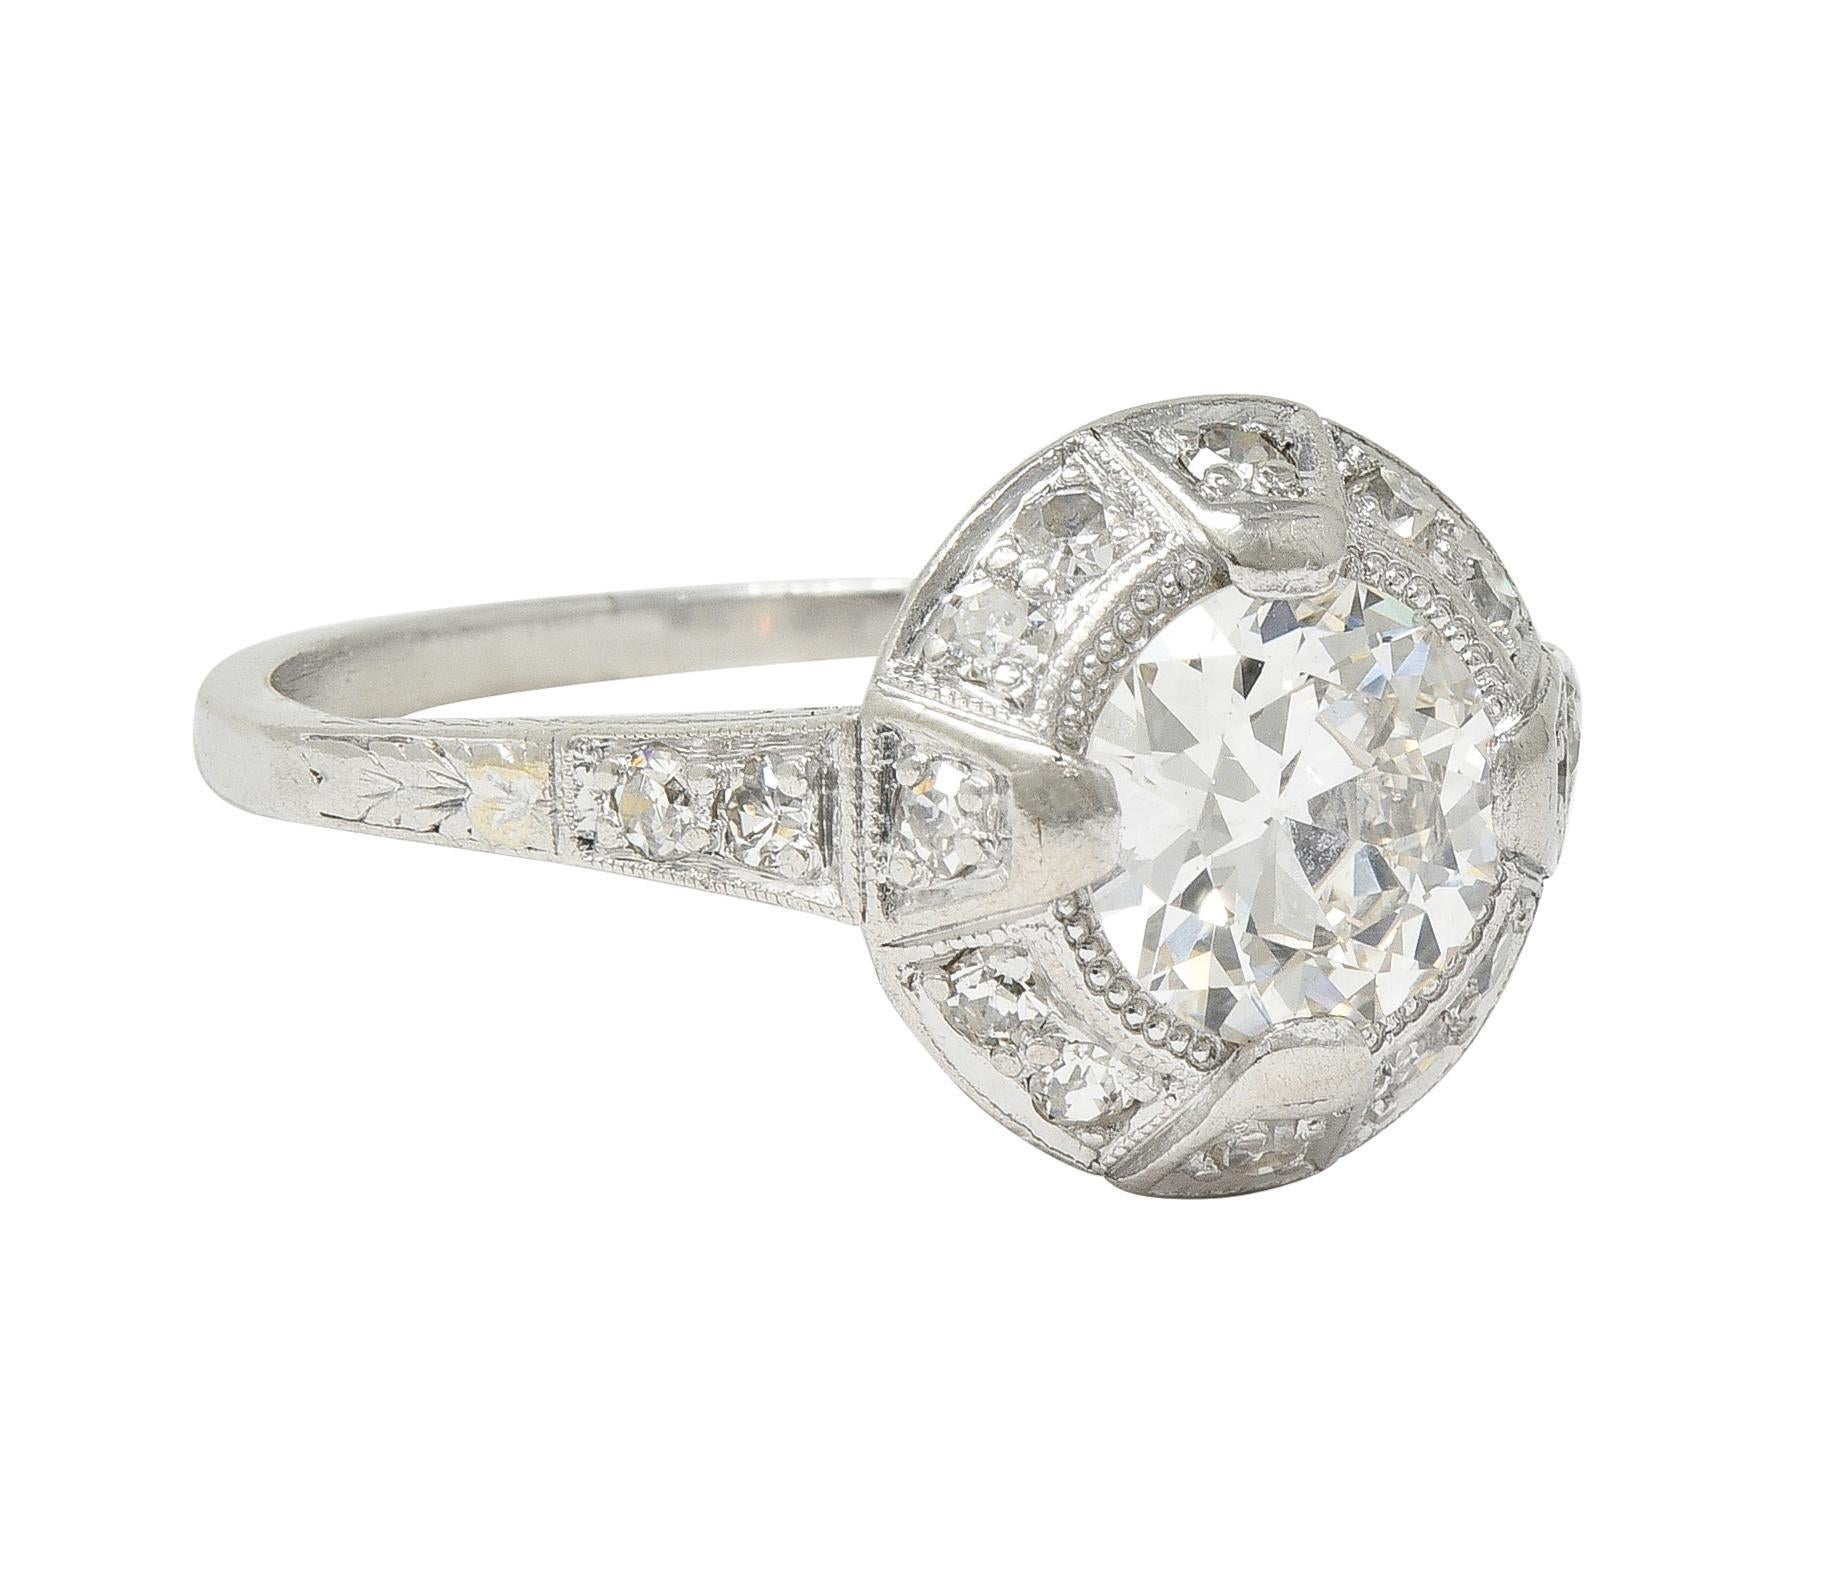 Centering an old European cut diamond weighing approximately 0.90 carat -G color with VS1 clarity
Set with wide tab-like prongs with a recessed halo surround bead set with single cut diamonds 
Weighing approximately 0.42 carat total - eye clean and